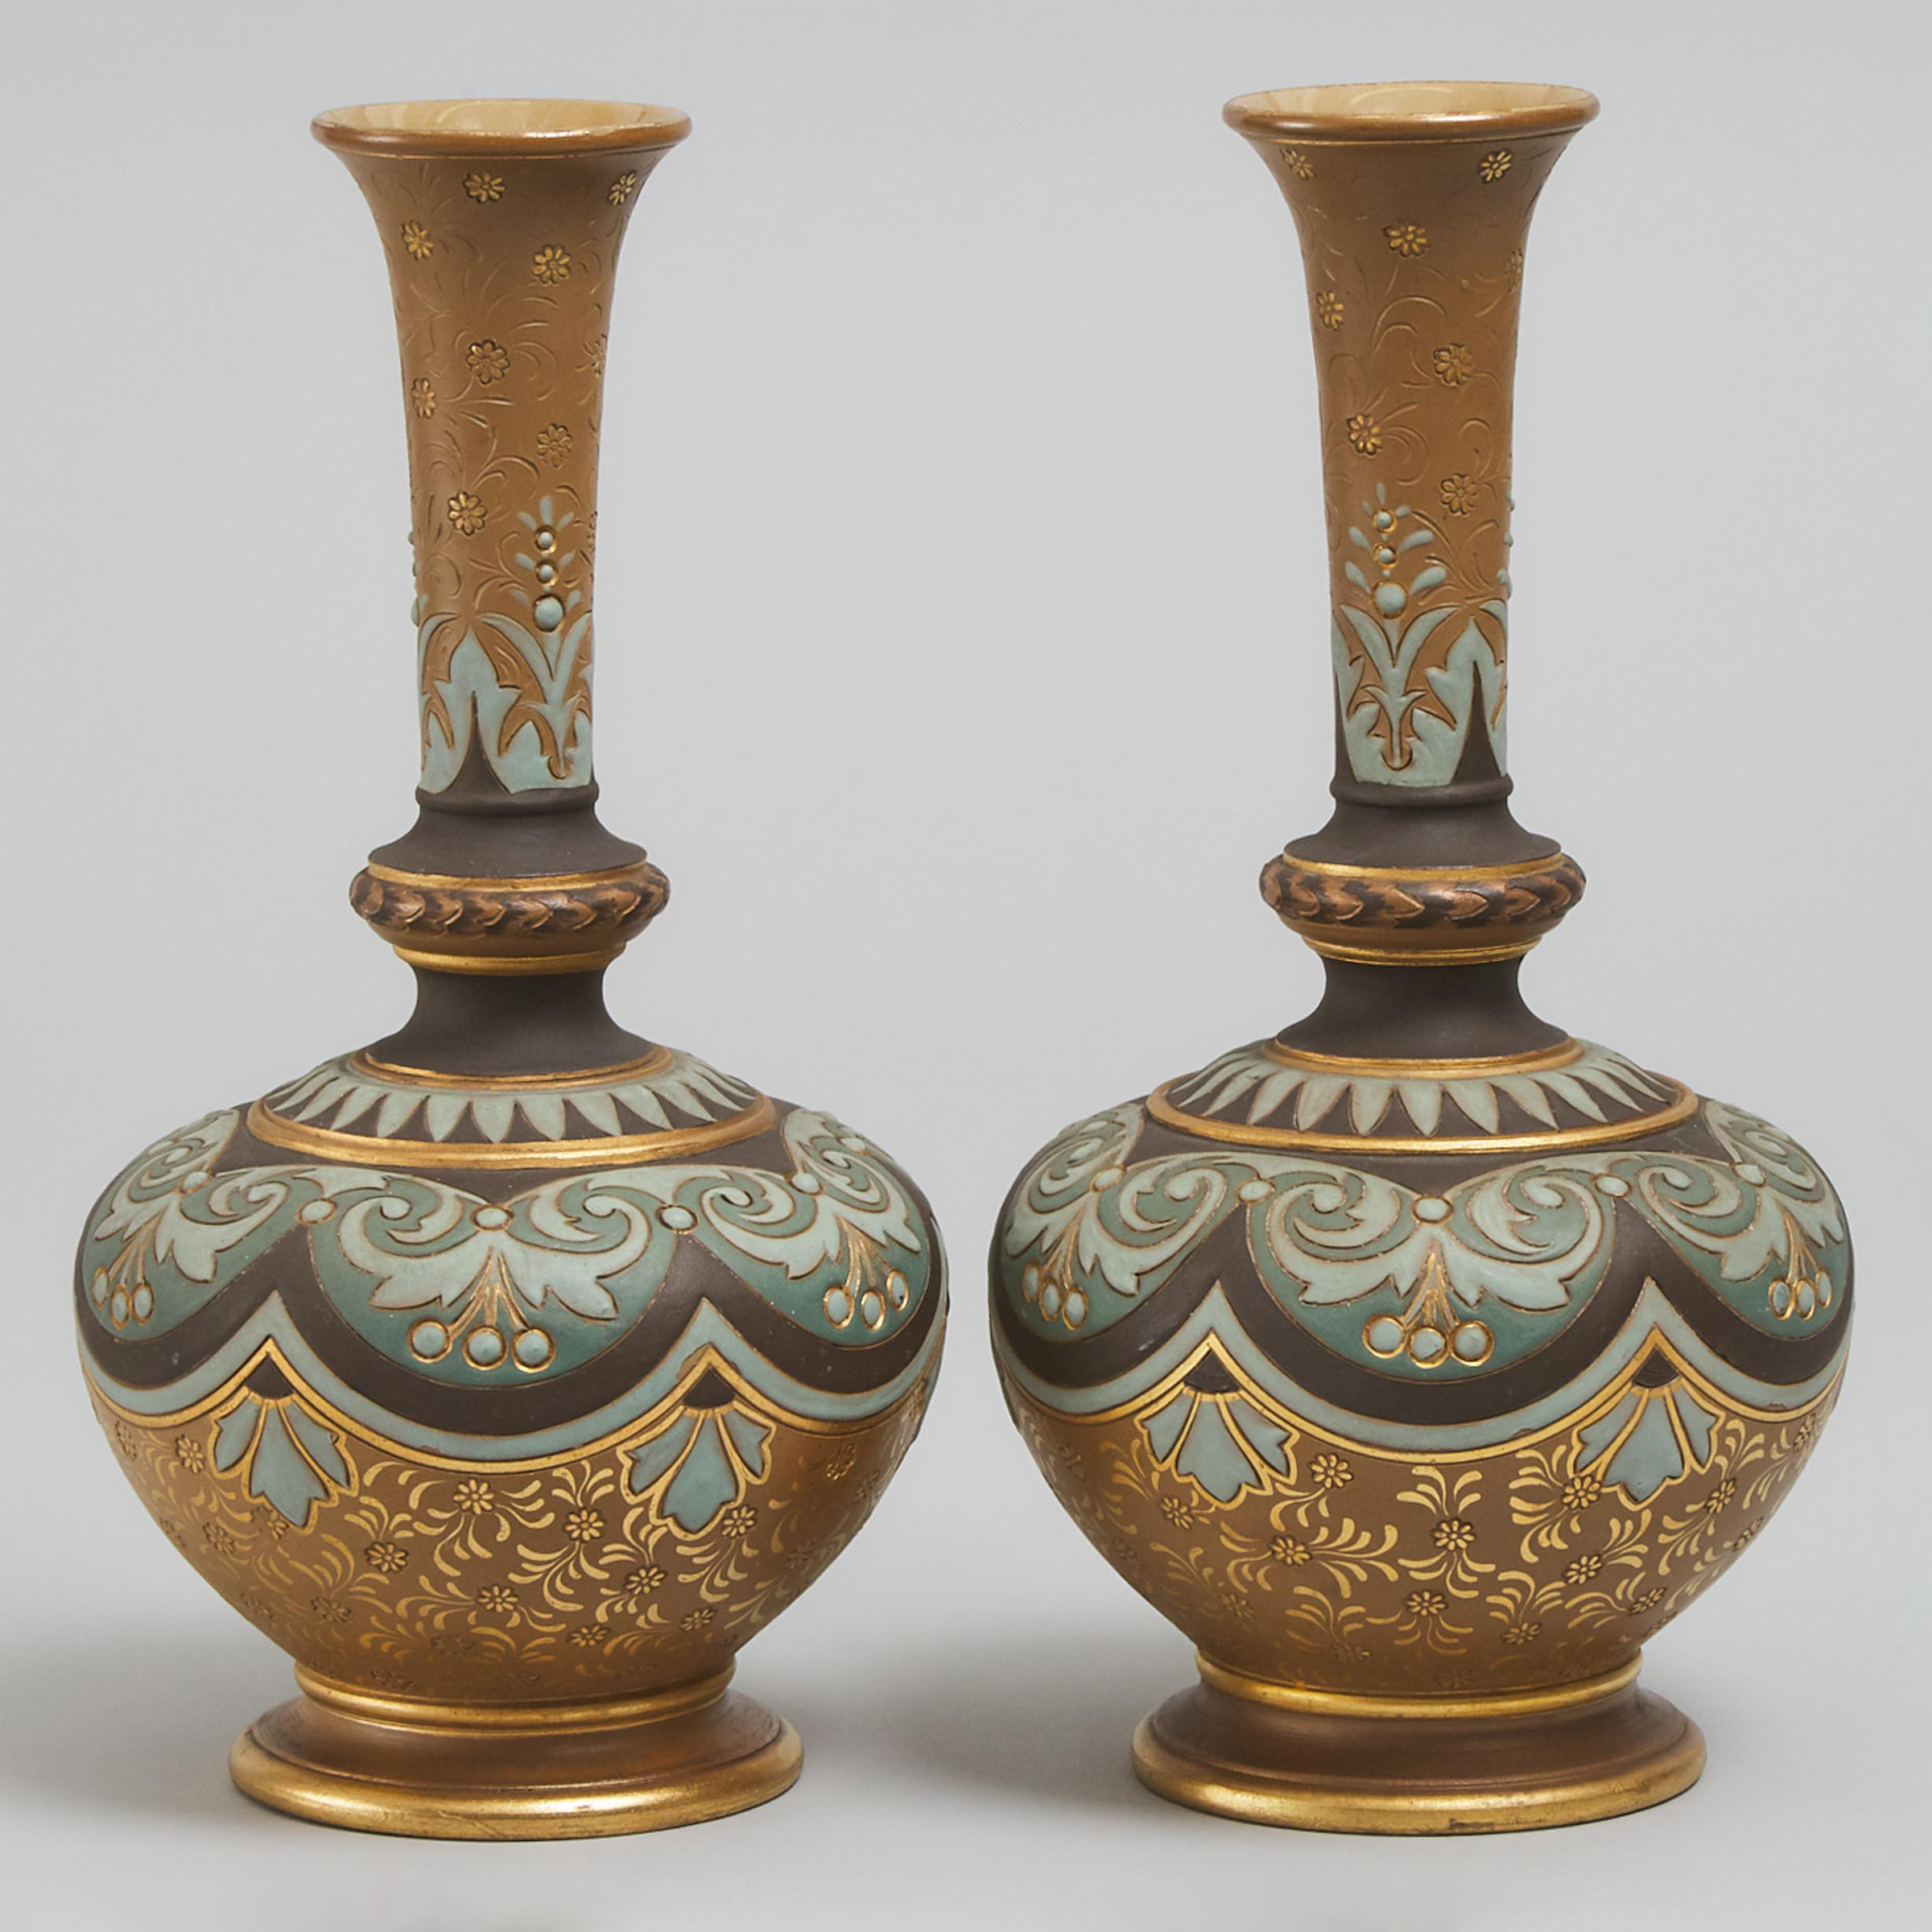 Pair of Doulton Lambeth Silicon Vases, Edith Rogers, 1885